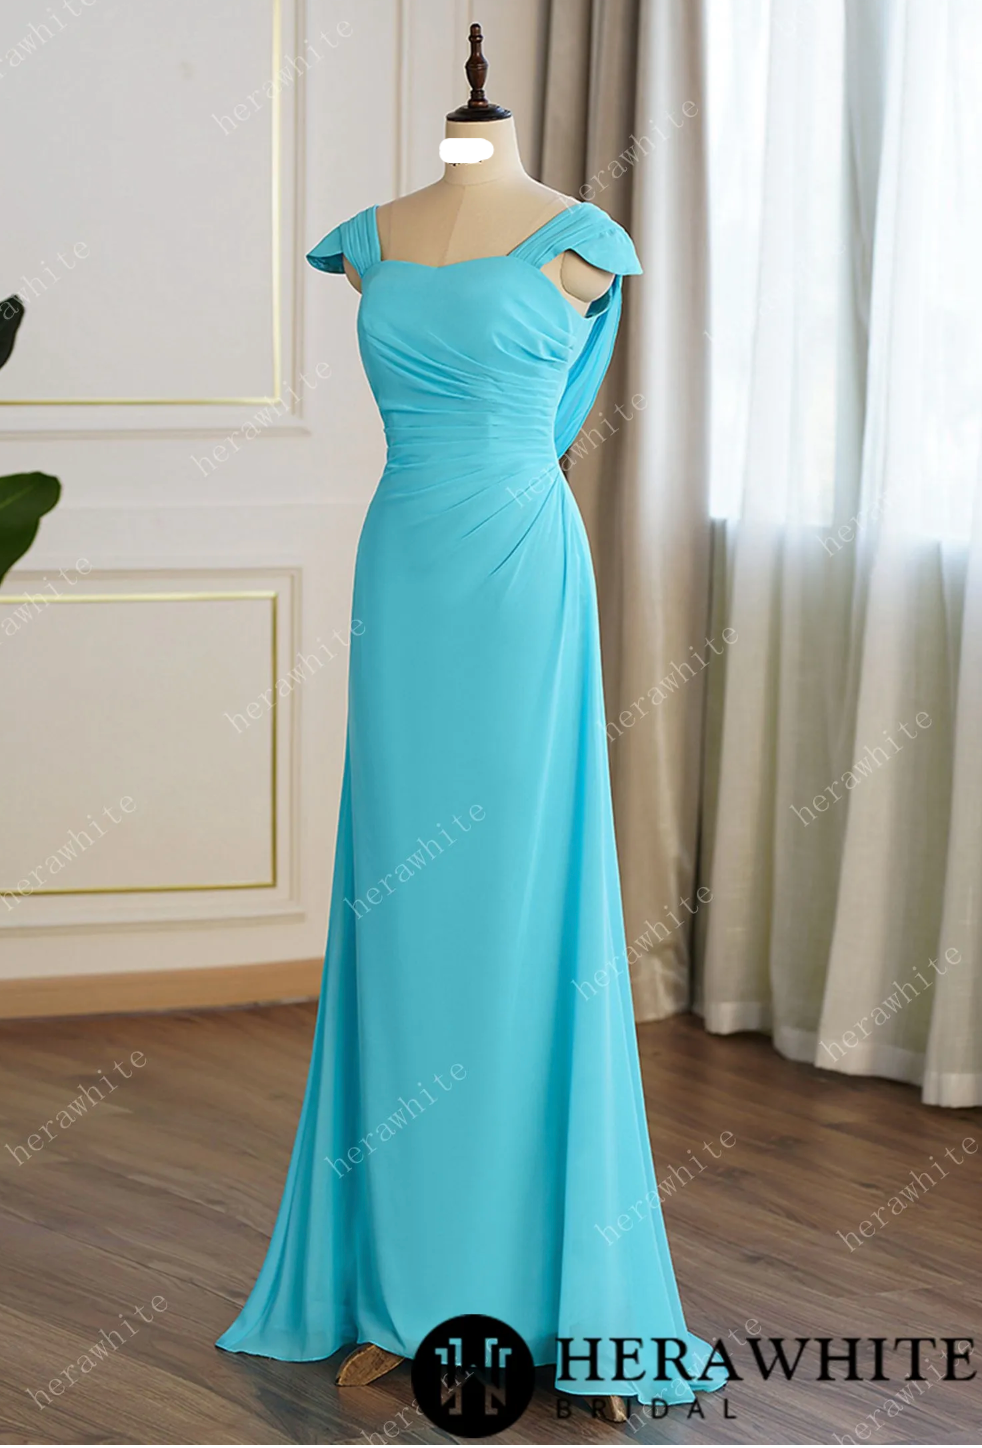 Pleated Cap Sleeves with Cowl Back Bridesmaid Dress